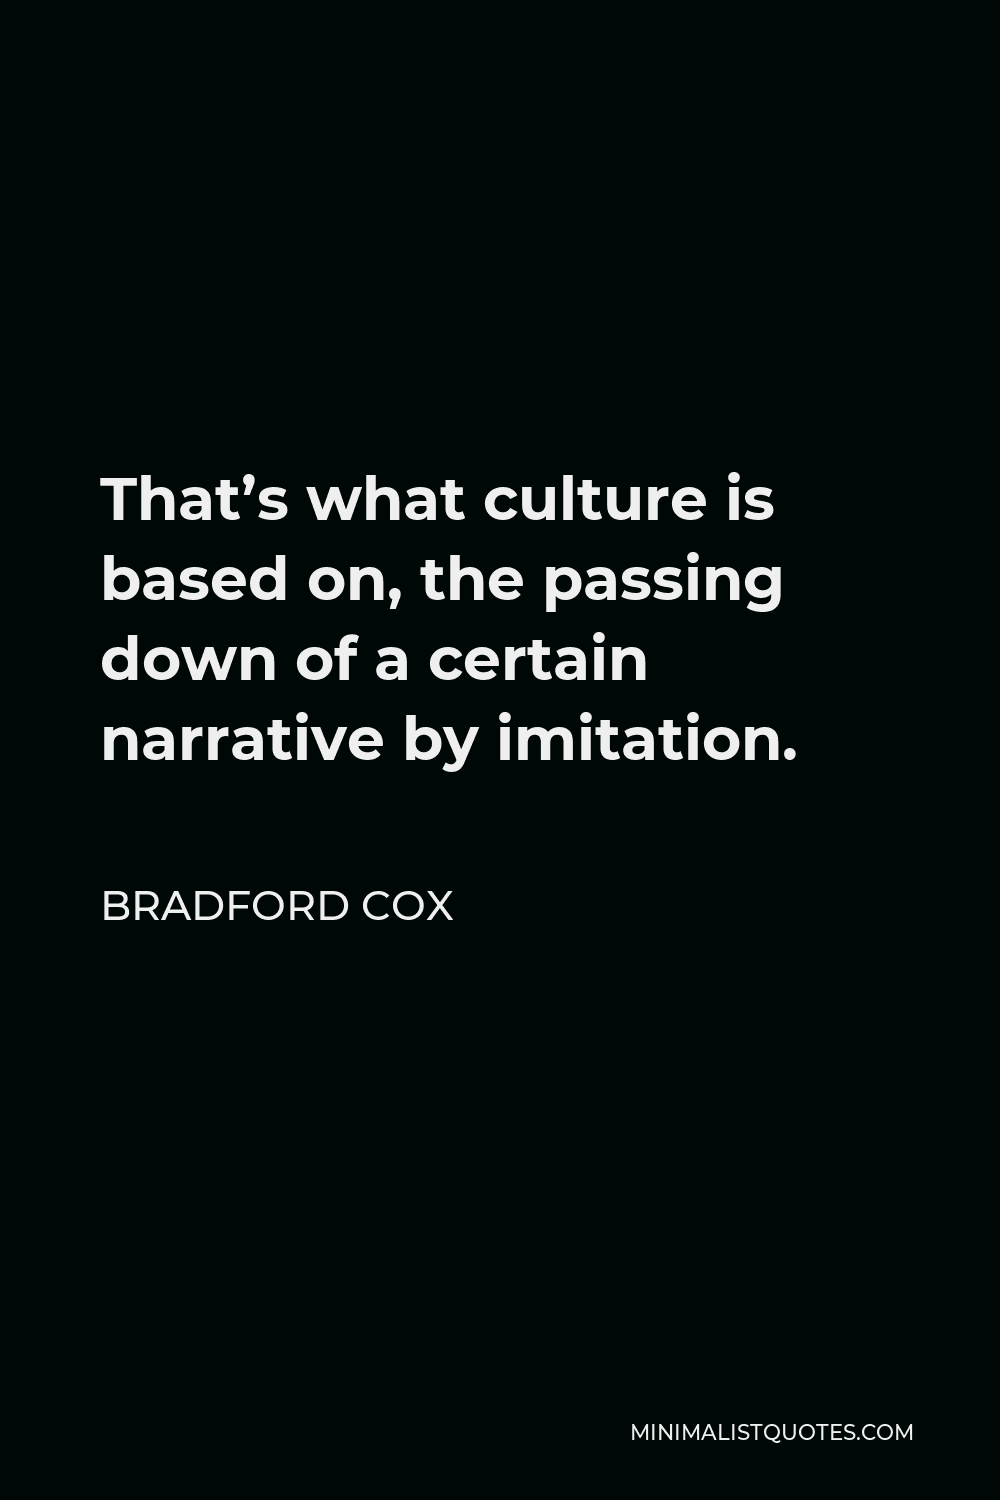 Bradford Cox Quote - That’s what culture is based on, the passing down of a certain narrative by imitation.